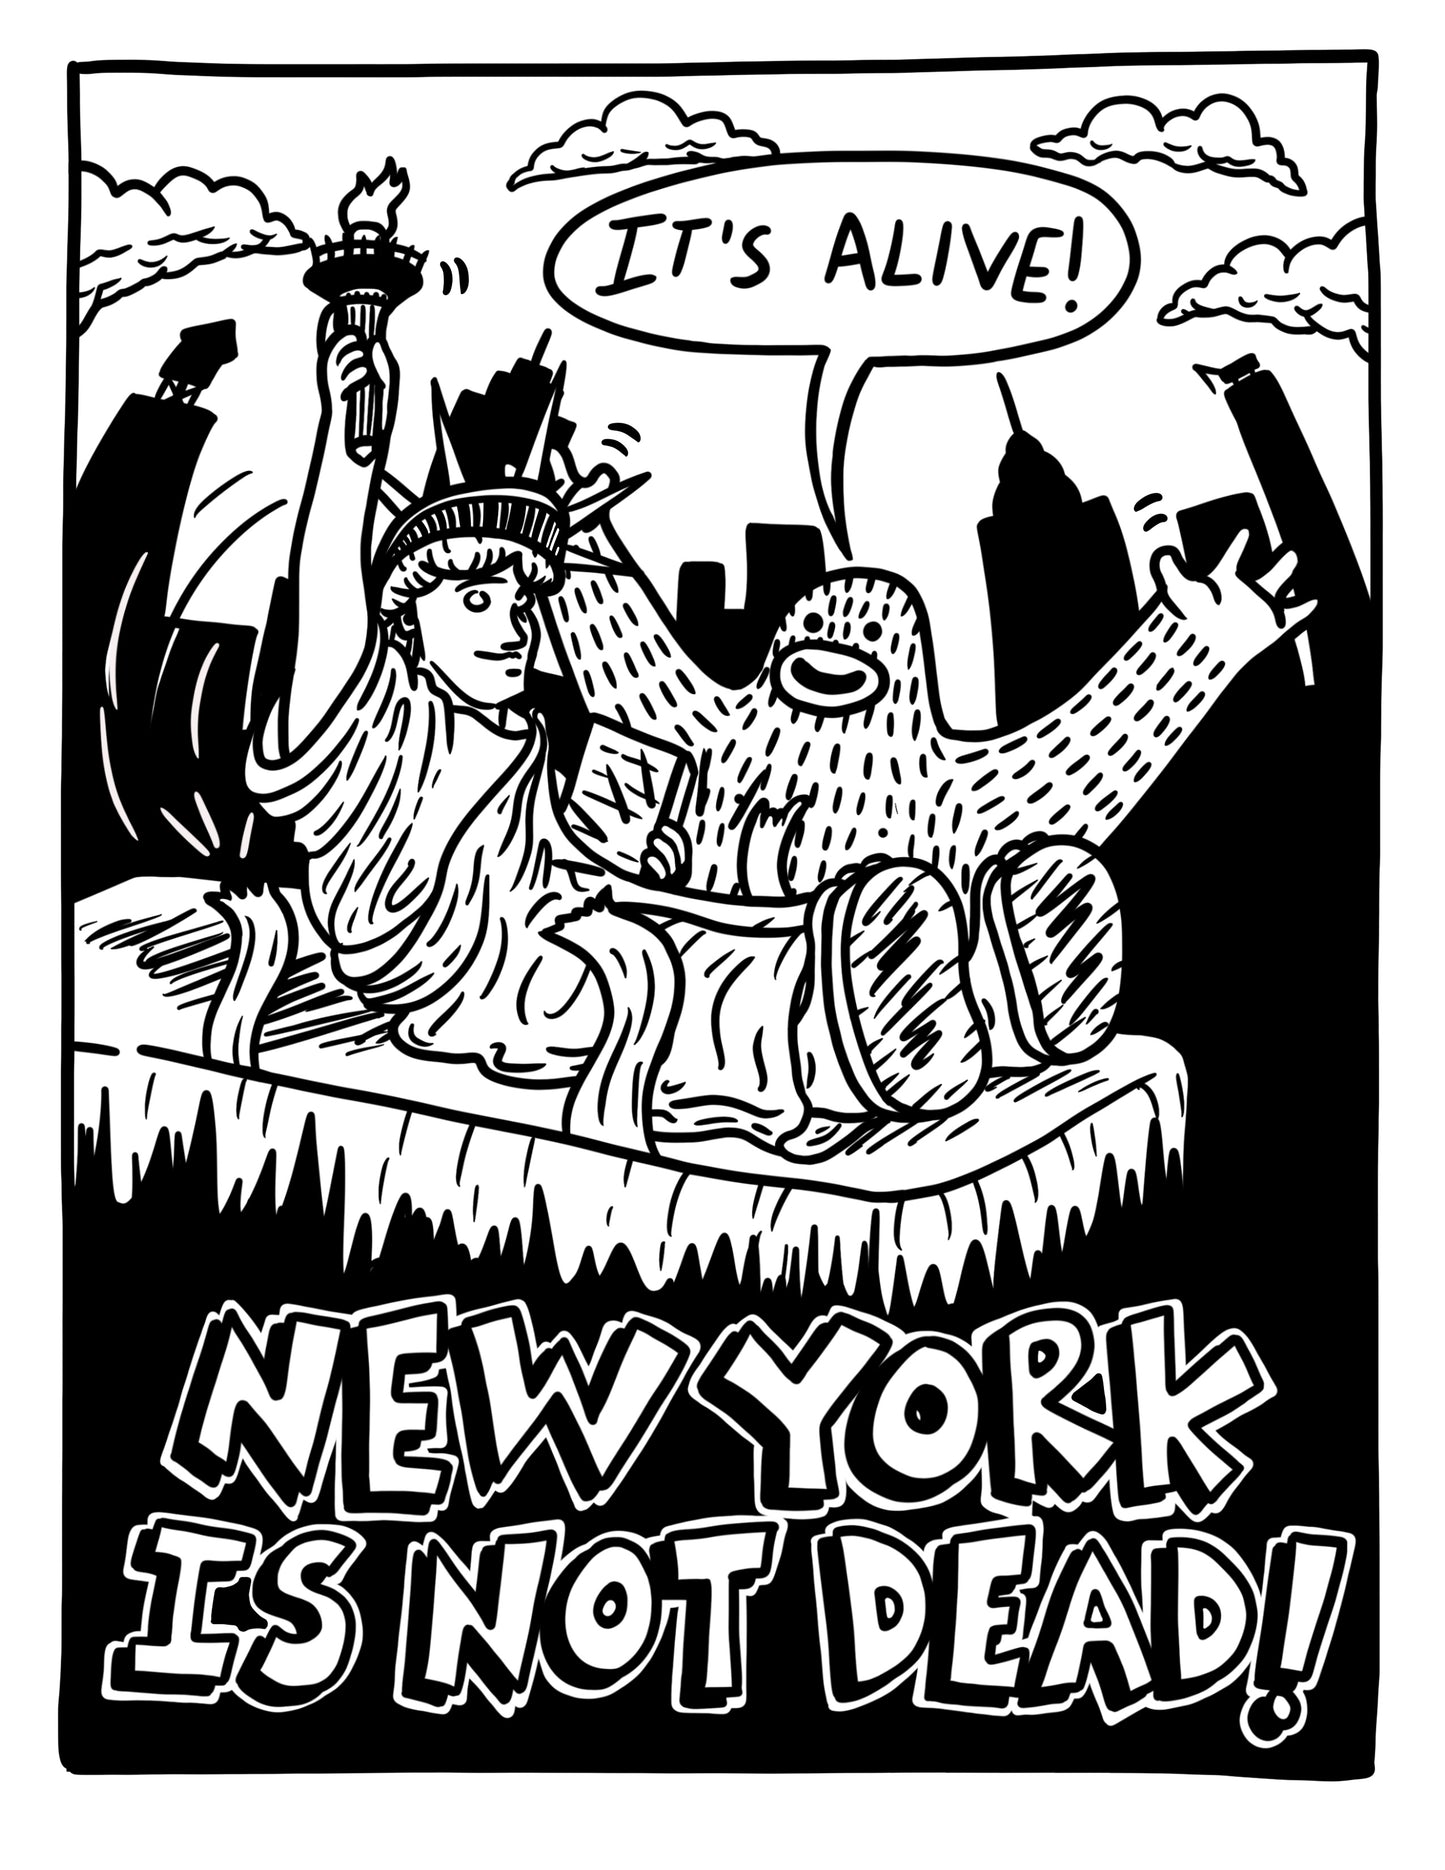 #59 - New York Is Not Dead